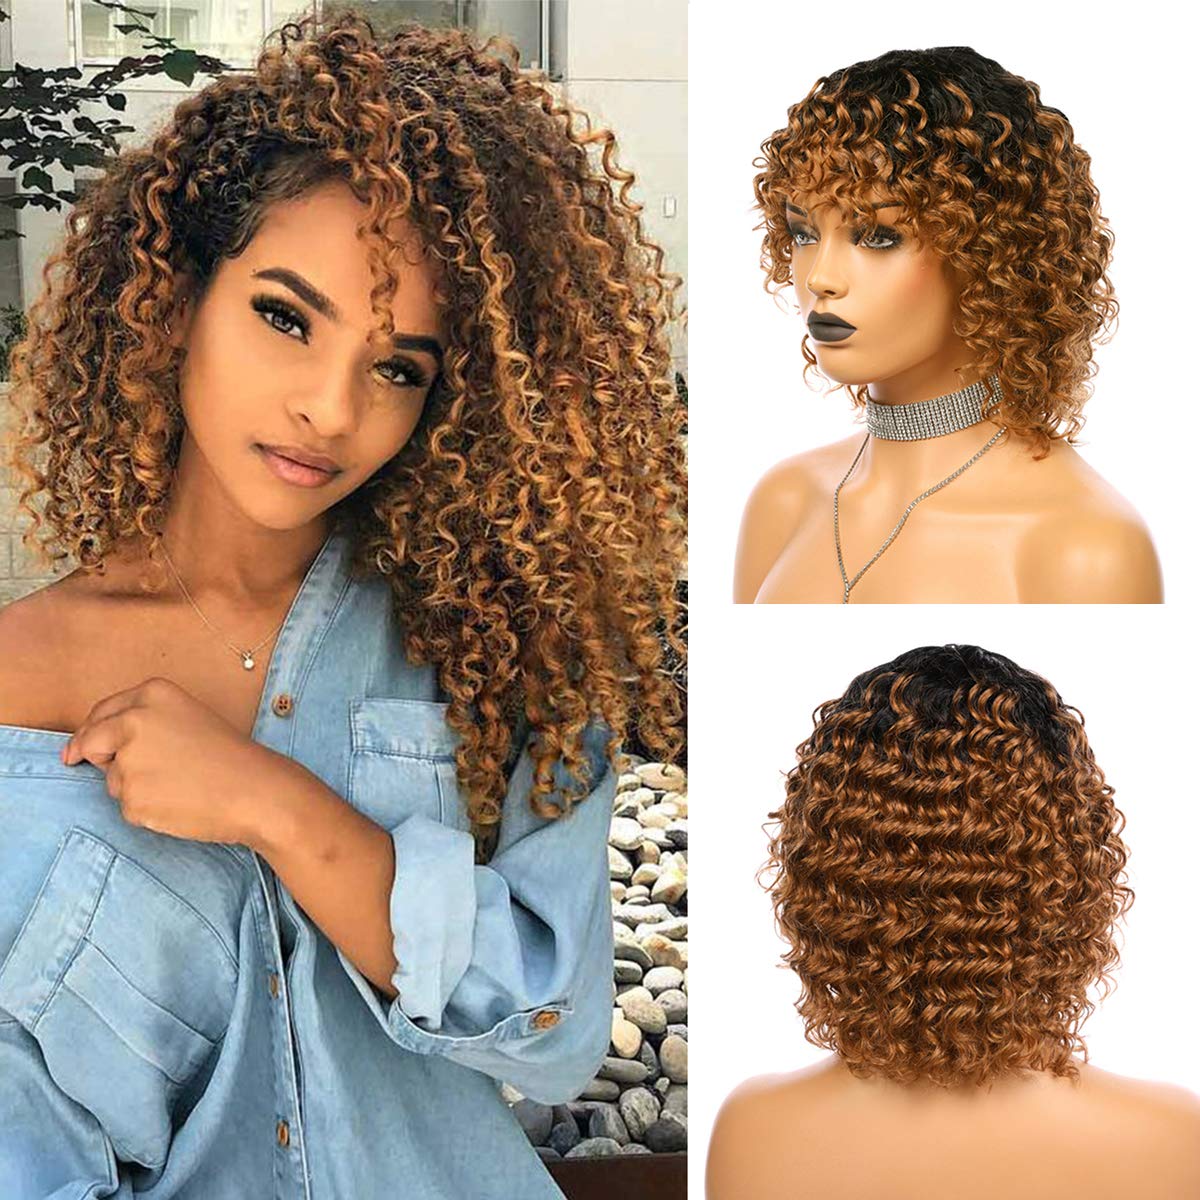 Price:$0.00     Full Blonde Human Hair Wigs Short Curly Bob Non Lace Front Wig Ombre 1B/30 Colored Wig with Black Roots for Women 12" Thick 150% Density   Beauty